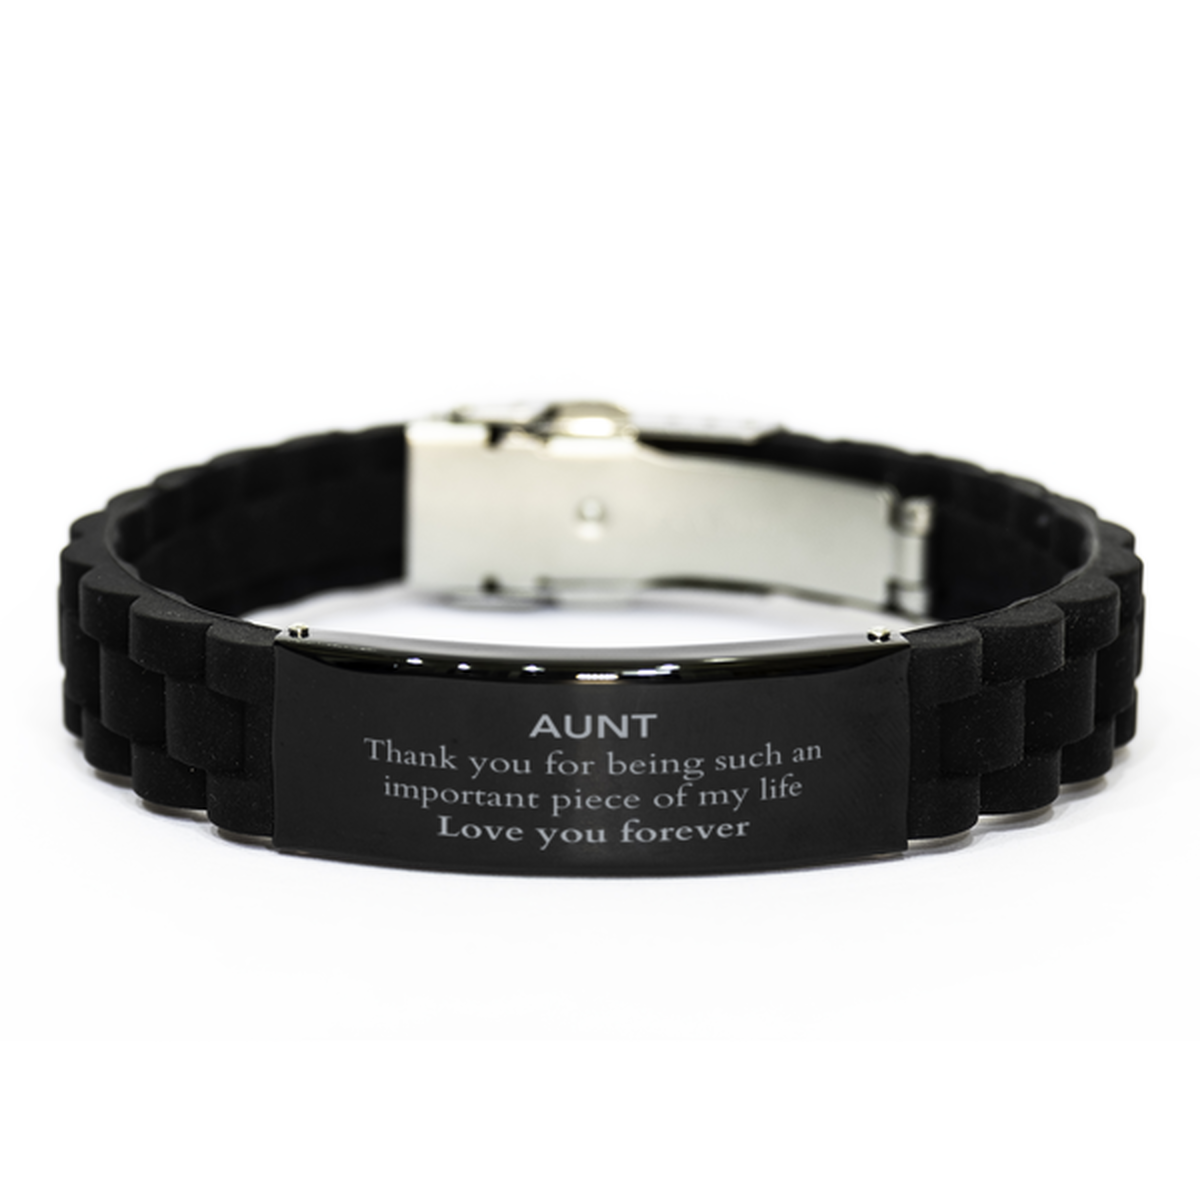 Appropriate Aunt Black Glidelock Clasp Bracelet Epic Birthday Gifts for Aunt Thank you for being such an important piece of my life Aunt Christmas Mothers Fathers Day